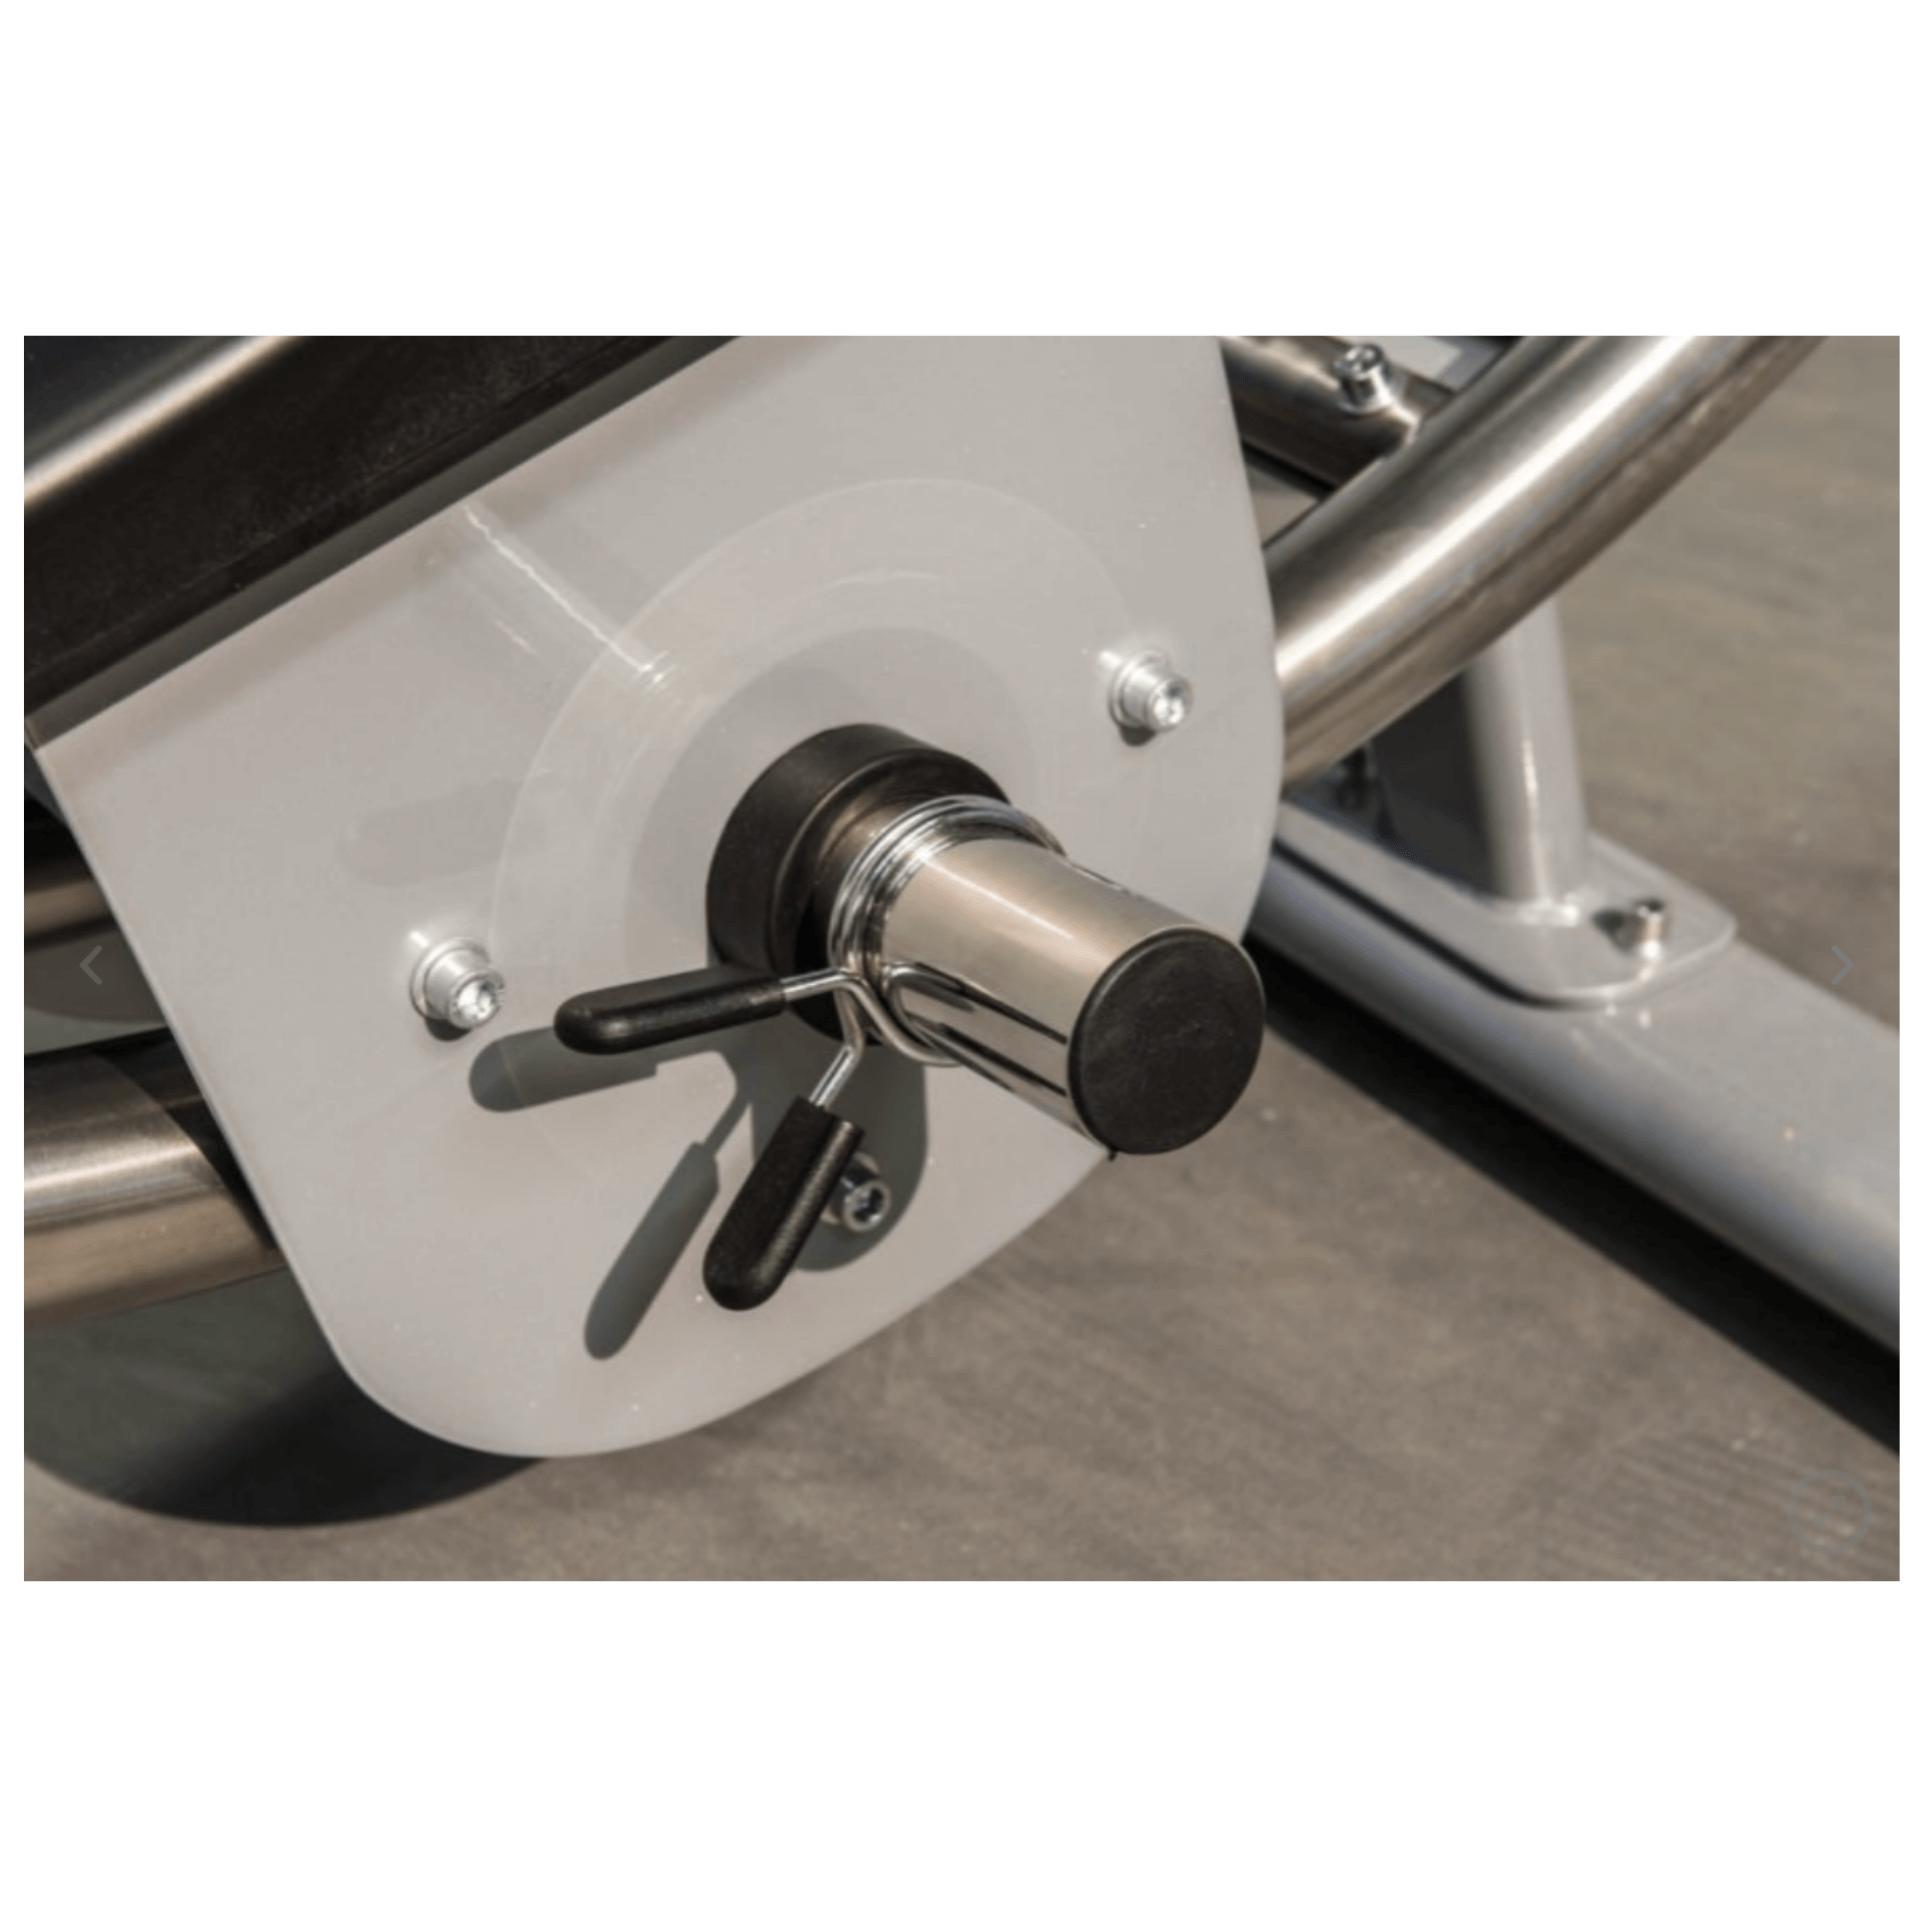 The Abs Company AB Coastal CS3000 close up of weight plate horn and collar to secure weight plates